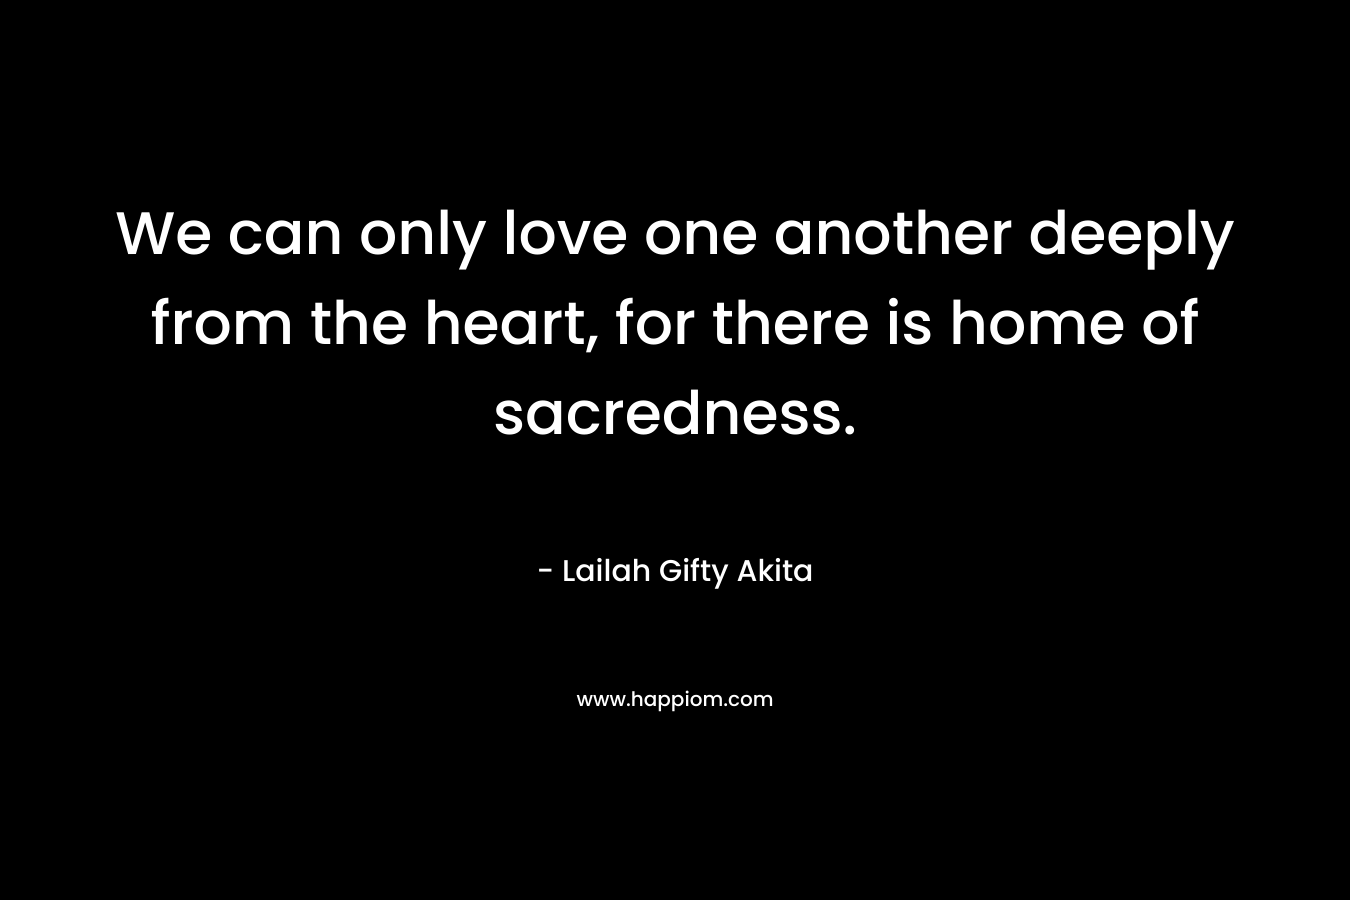 We can only love one another deeply from the heart, for there is home of sacredness.